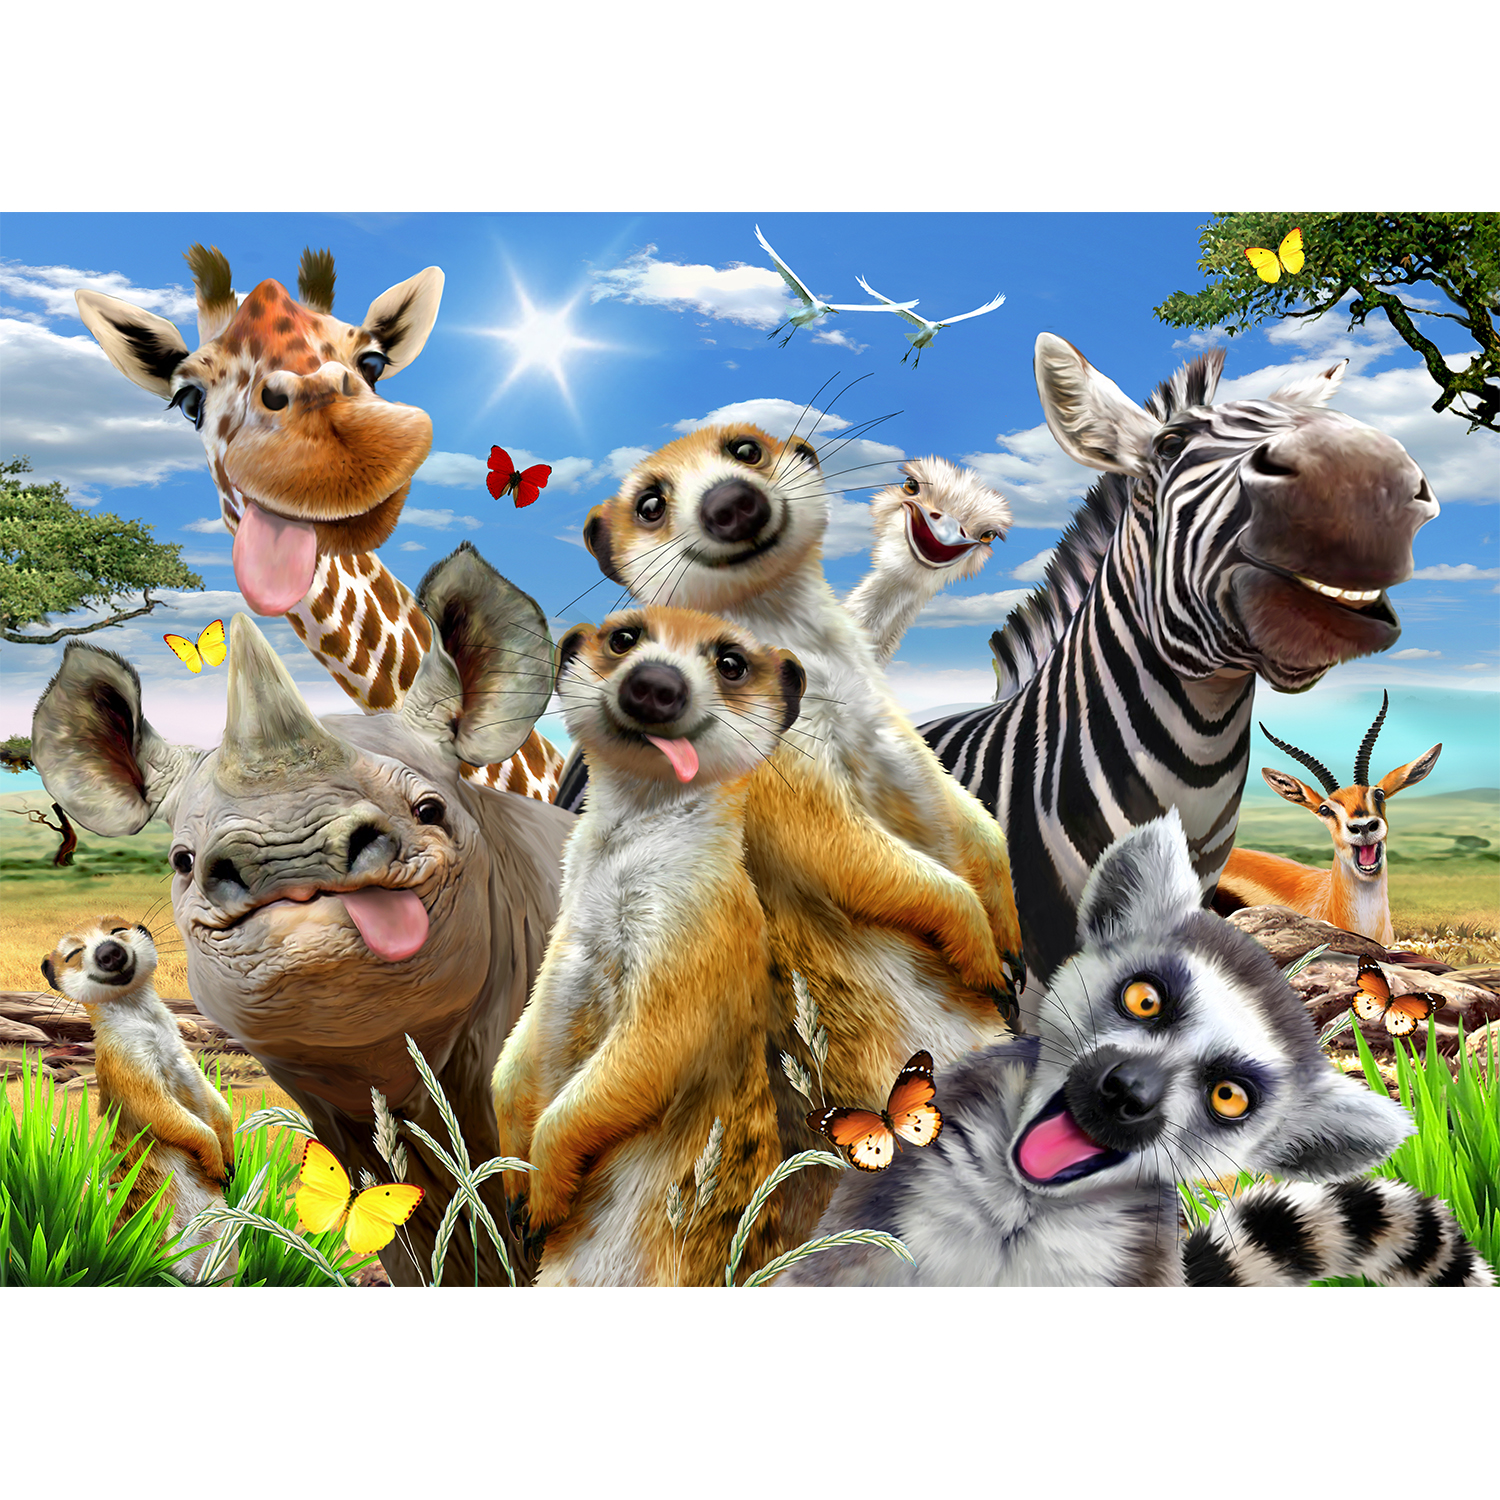 36pc puzzle African sunshine with local animals taking a funny selfie